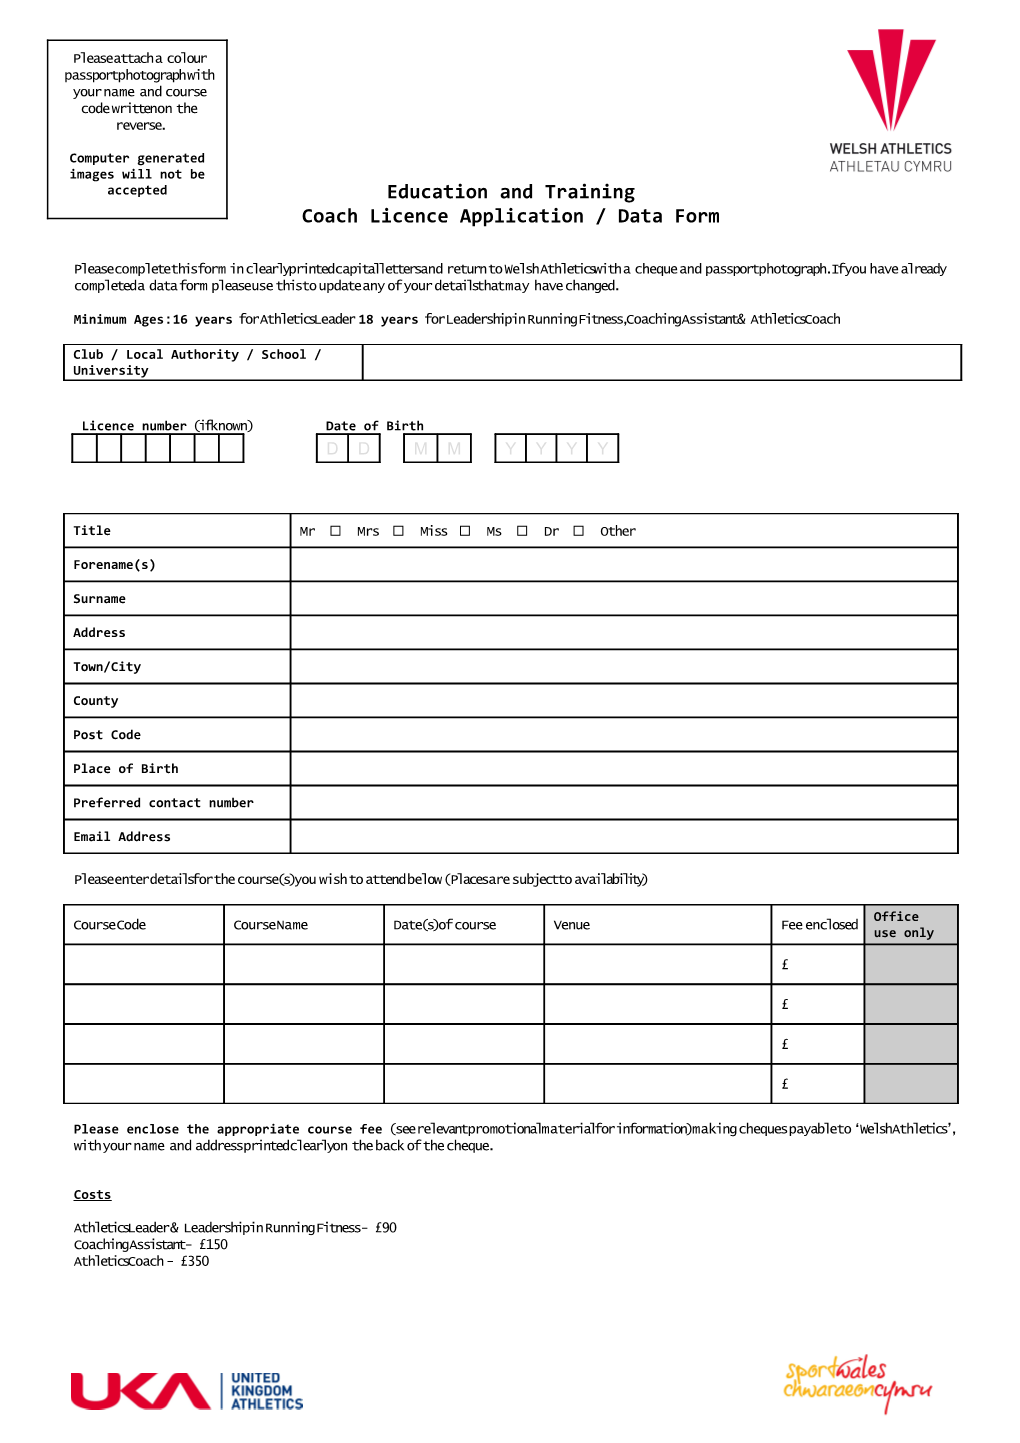 Coach Licence Application / Data Form